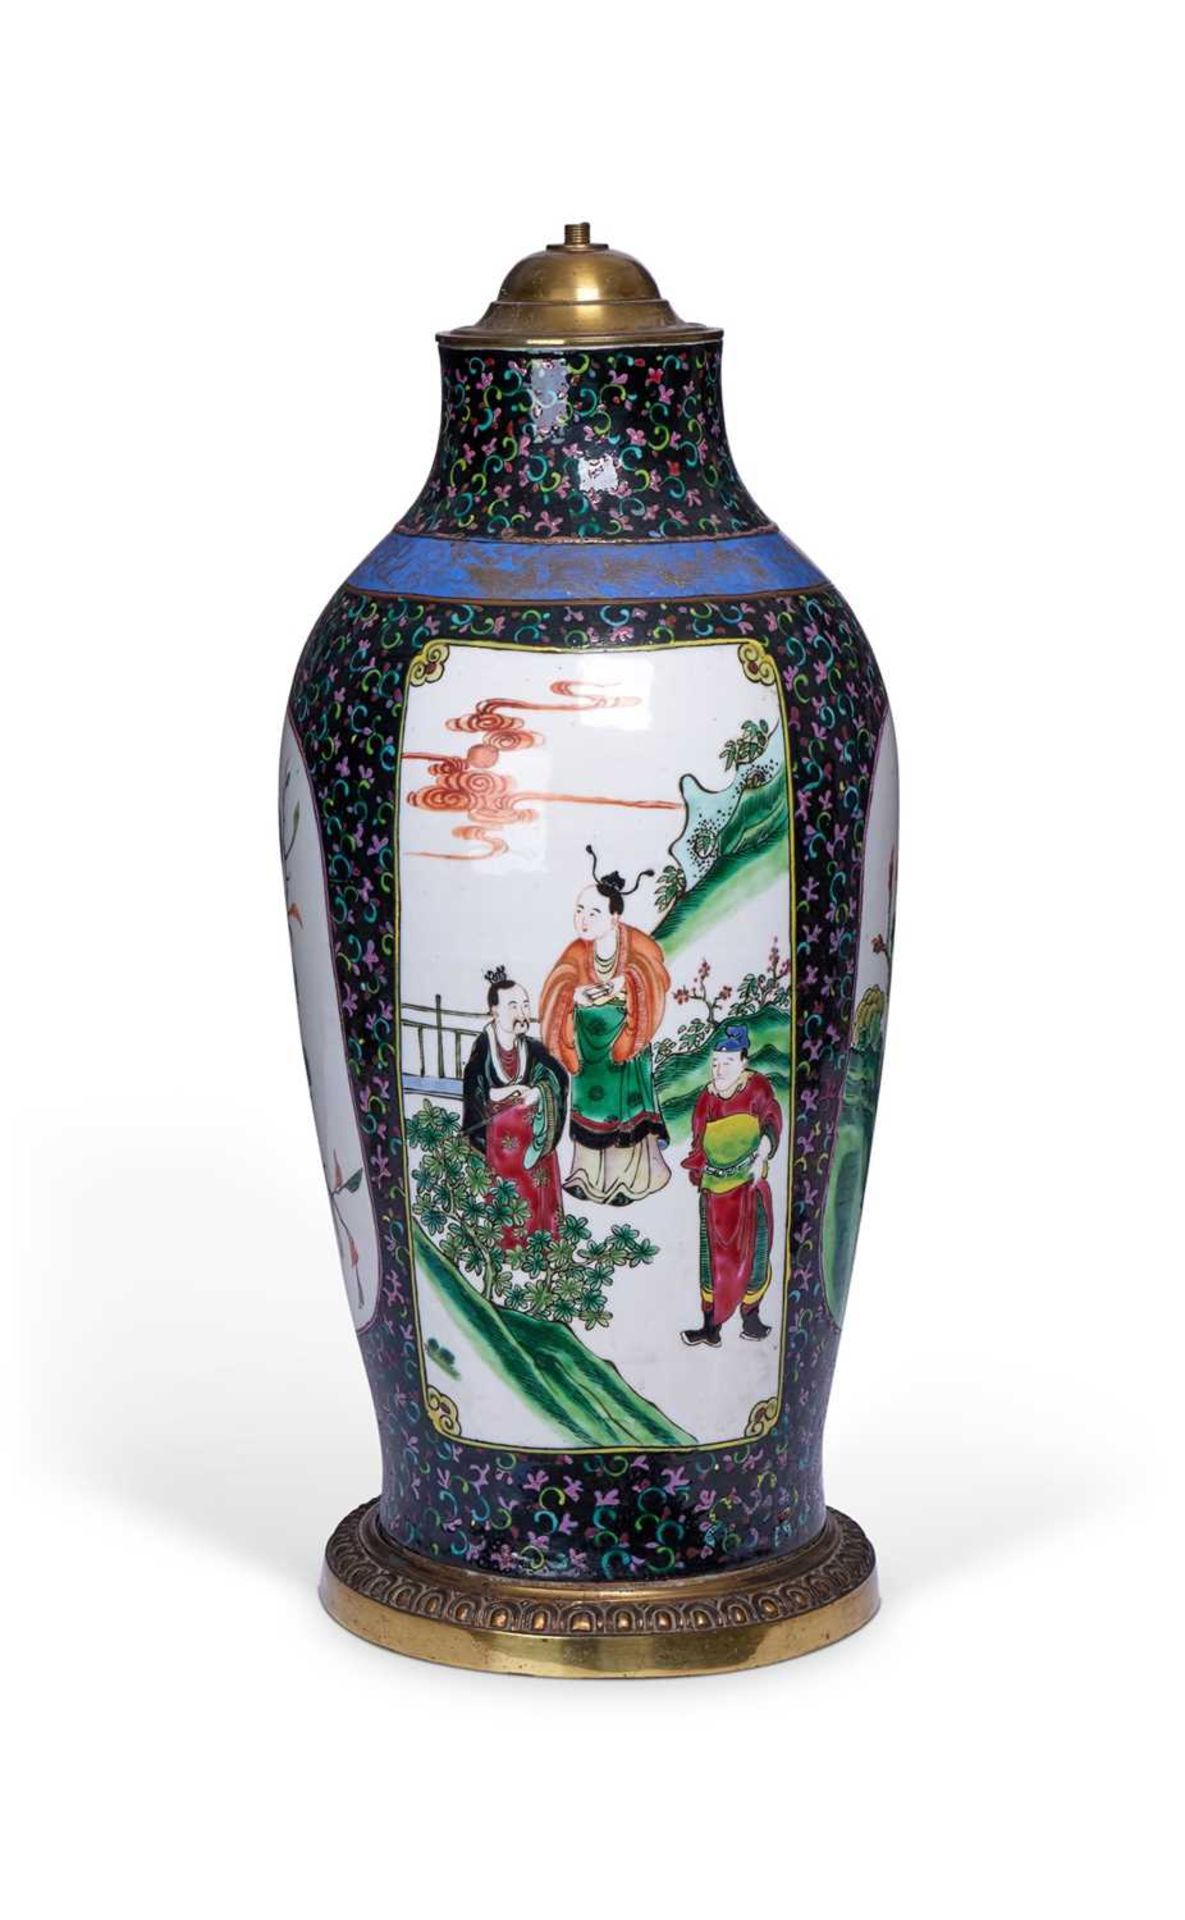 A LATE 19TH CENTURY CHINESE FAMILLE NOIR PORCELAIN VASE LAMP